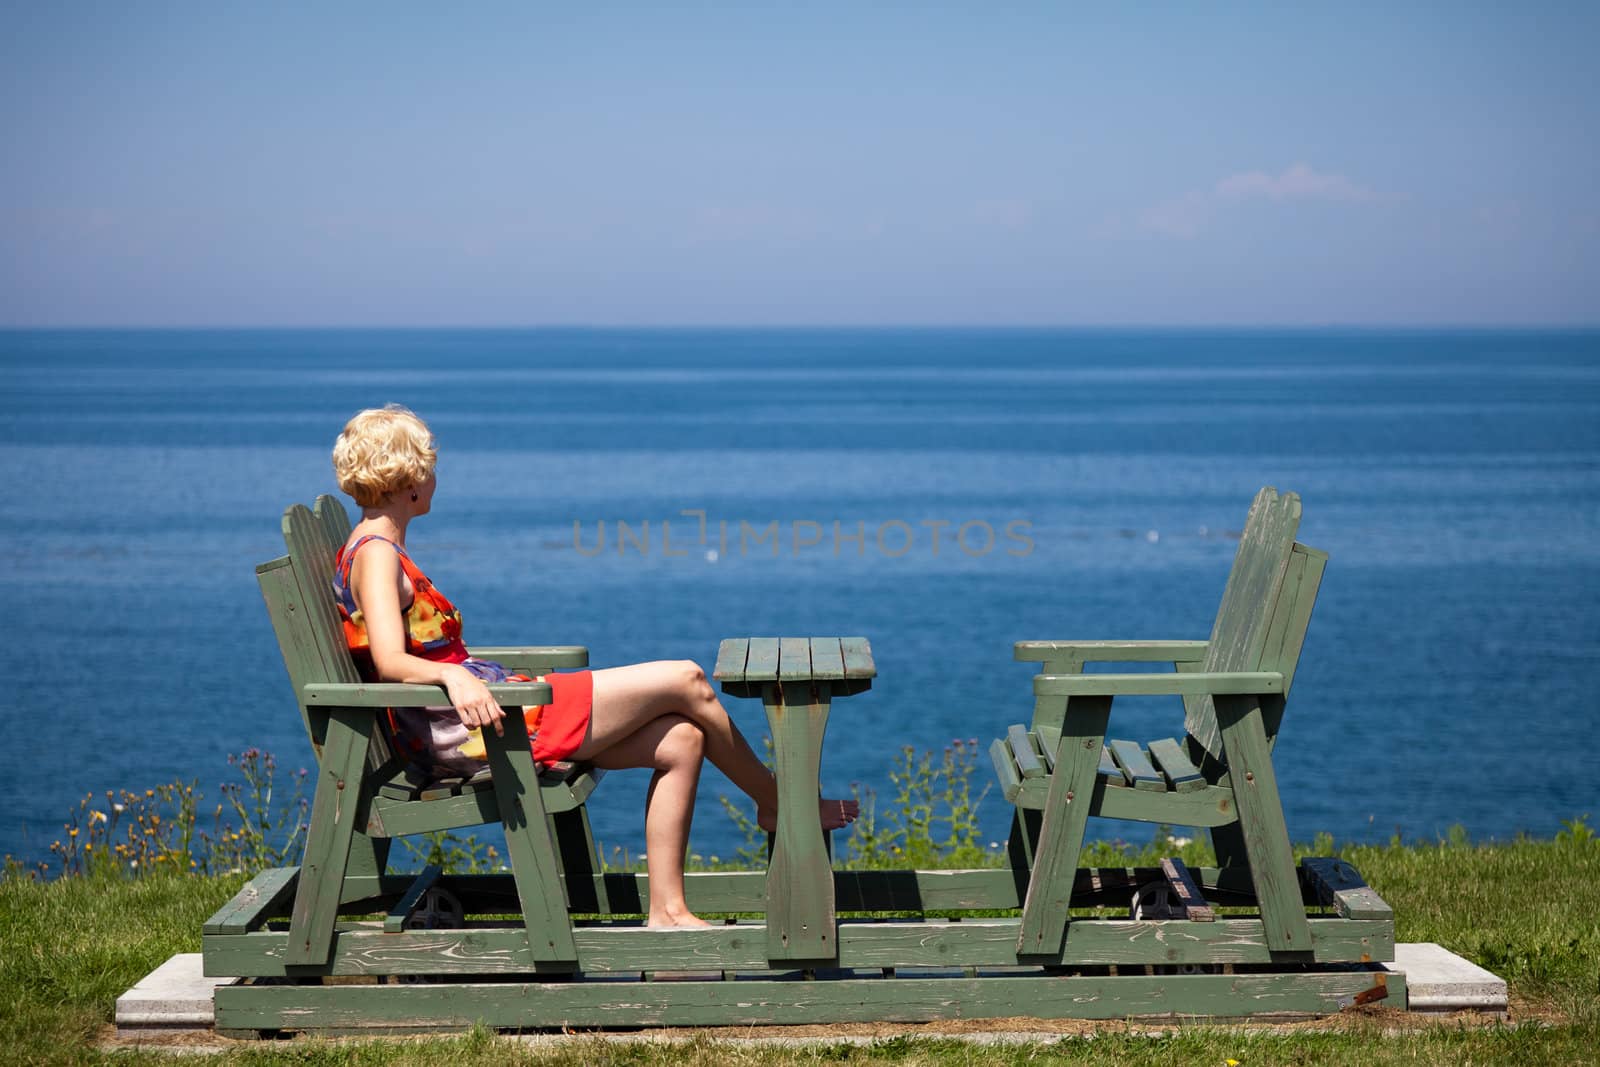 Girl having a beautiful moment on a bench in vacation